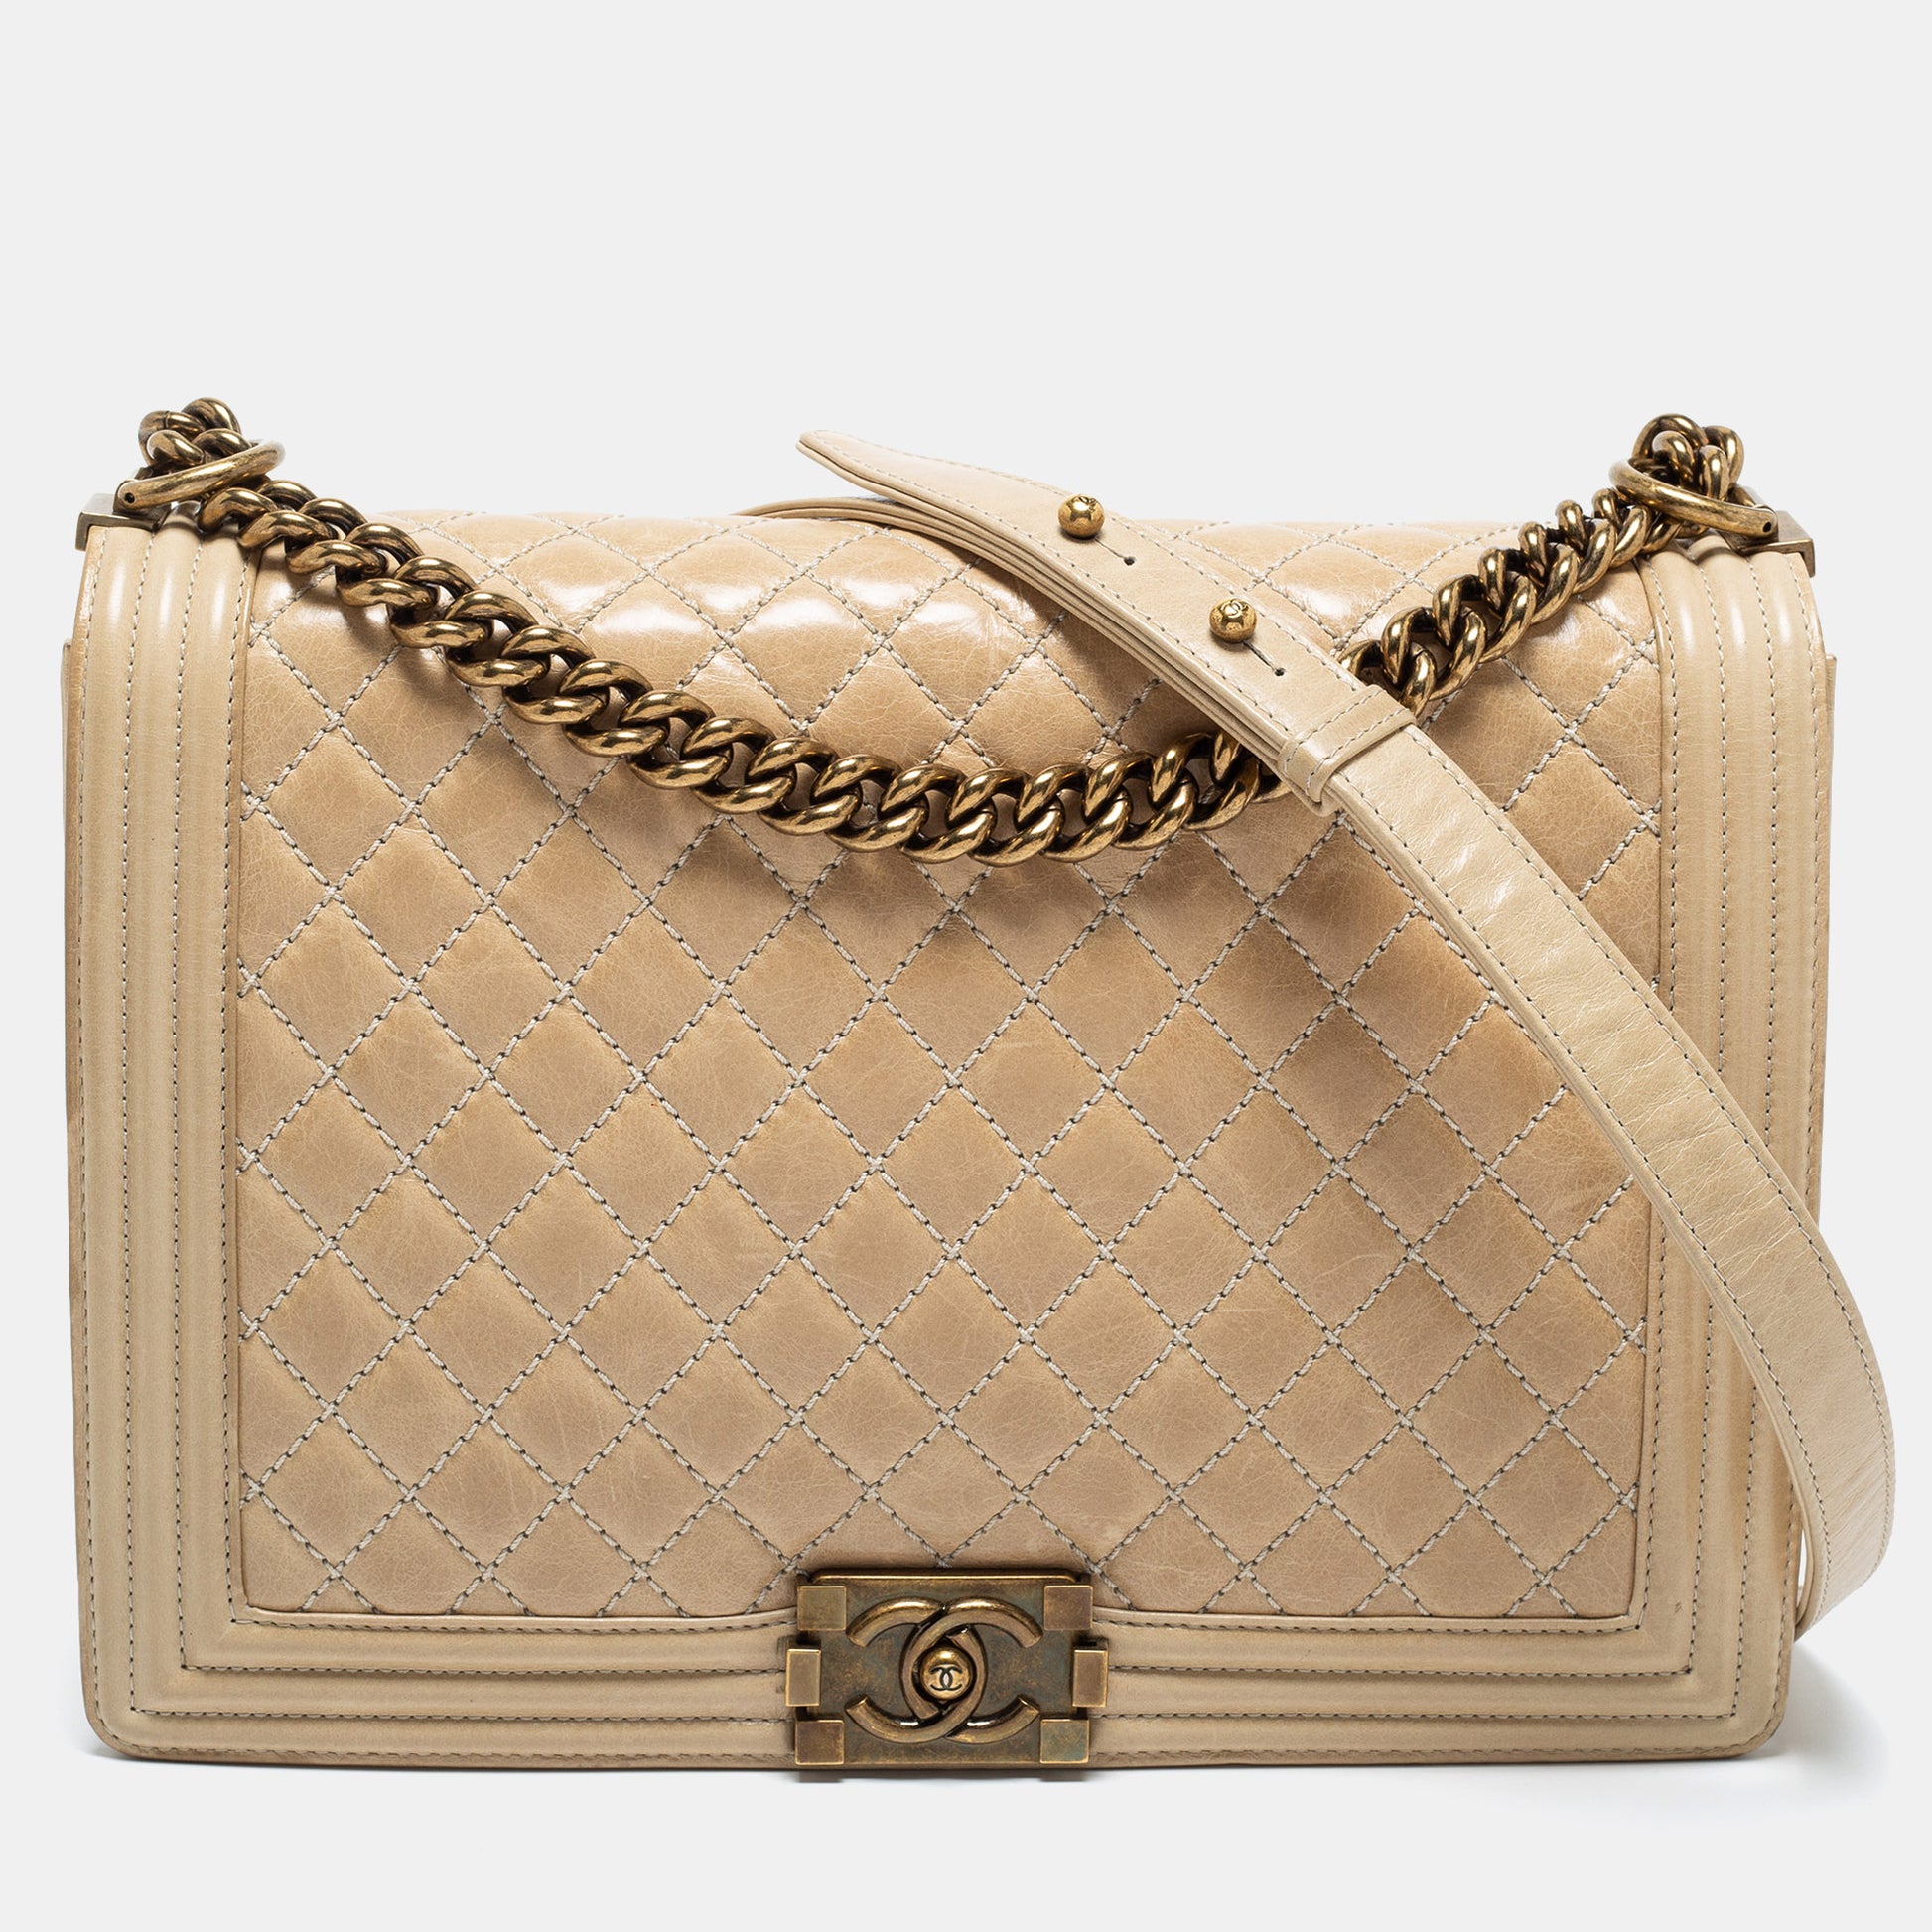 Chanel Two Tone Beige Quilted Glossy Leather Large Boy Flap Bag